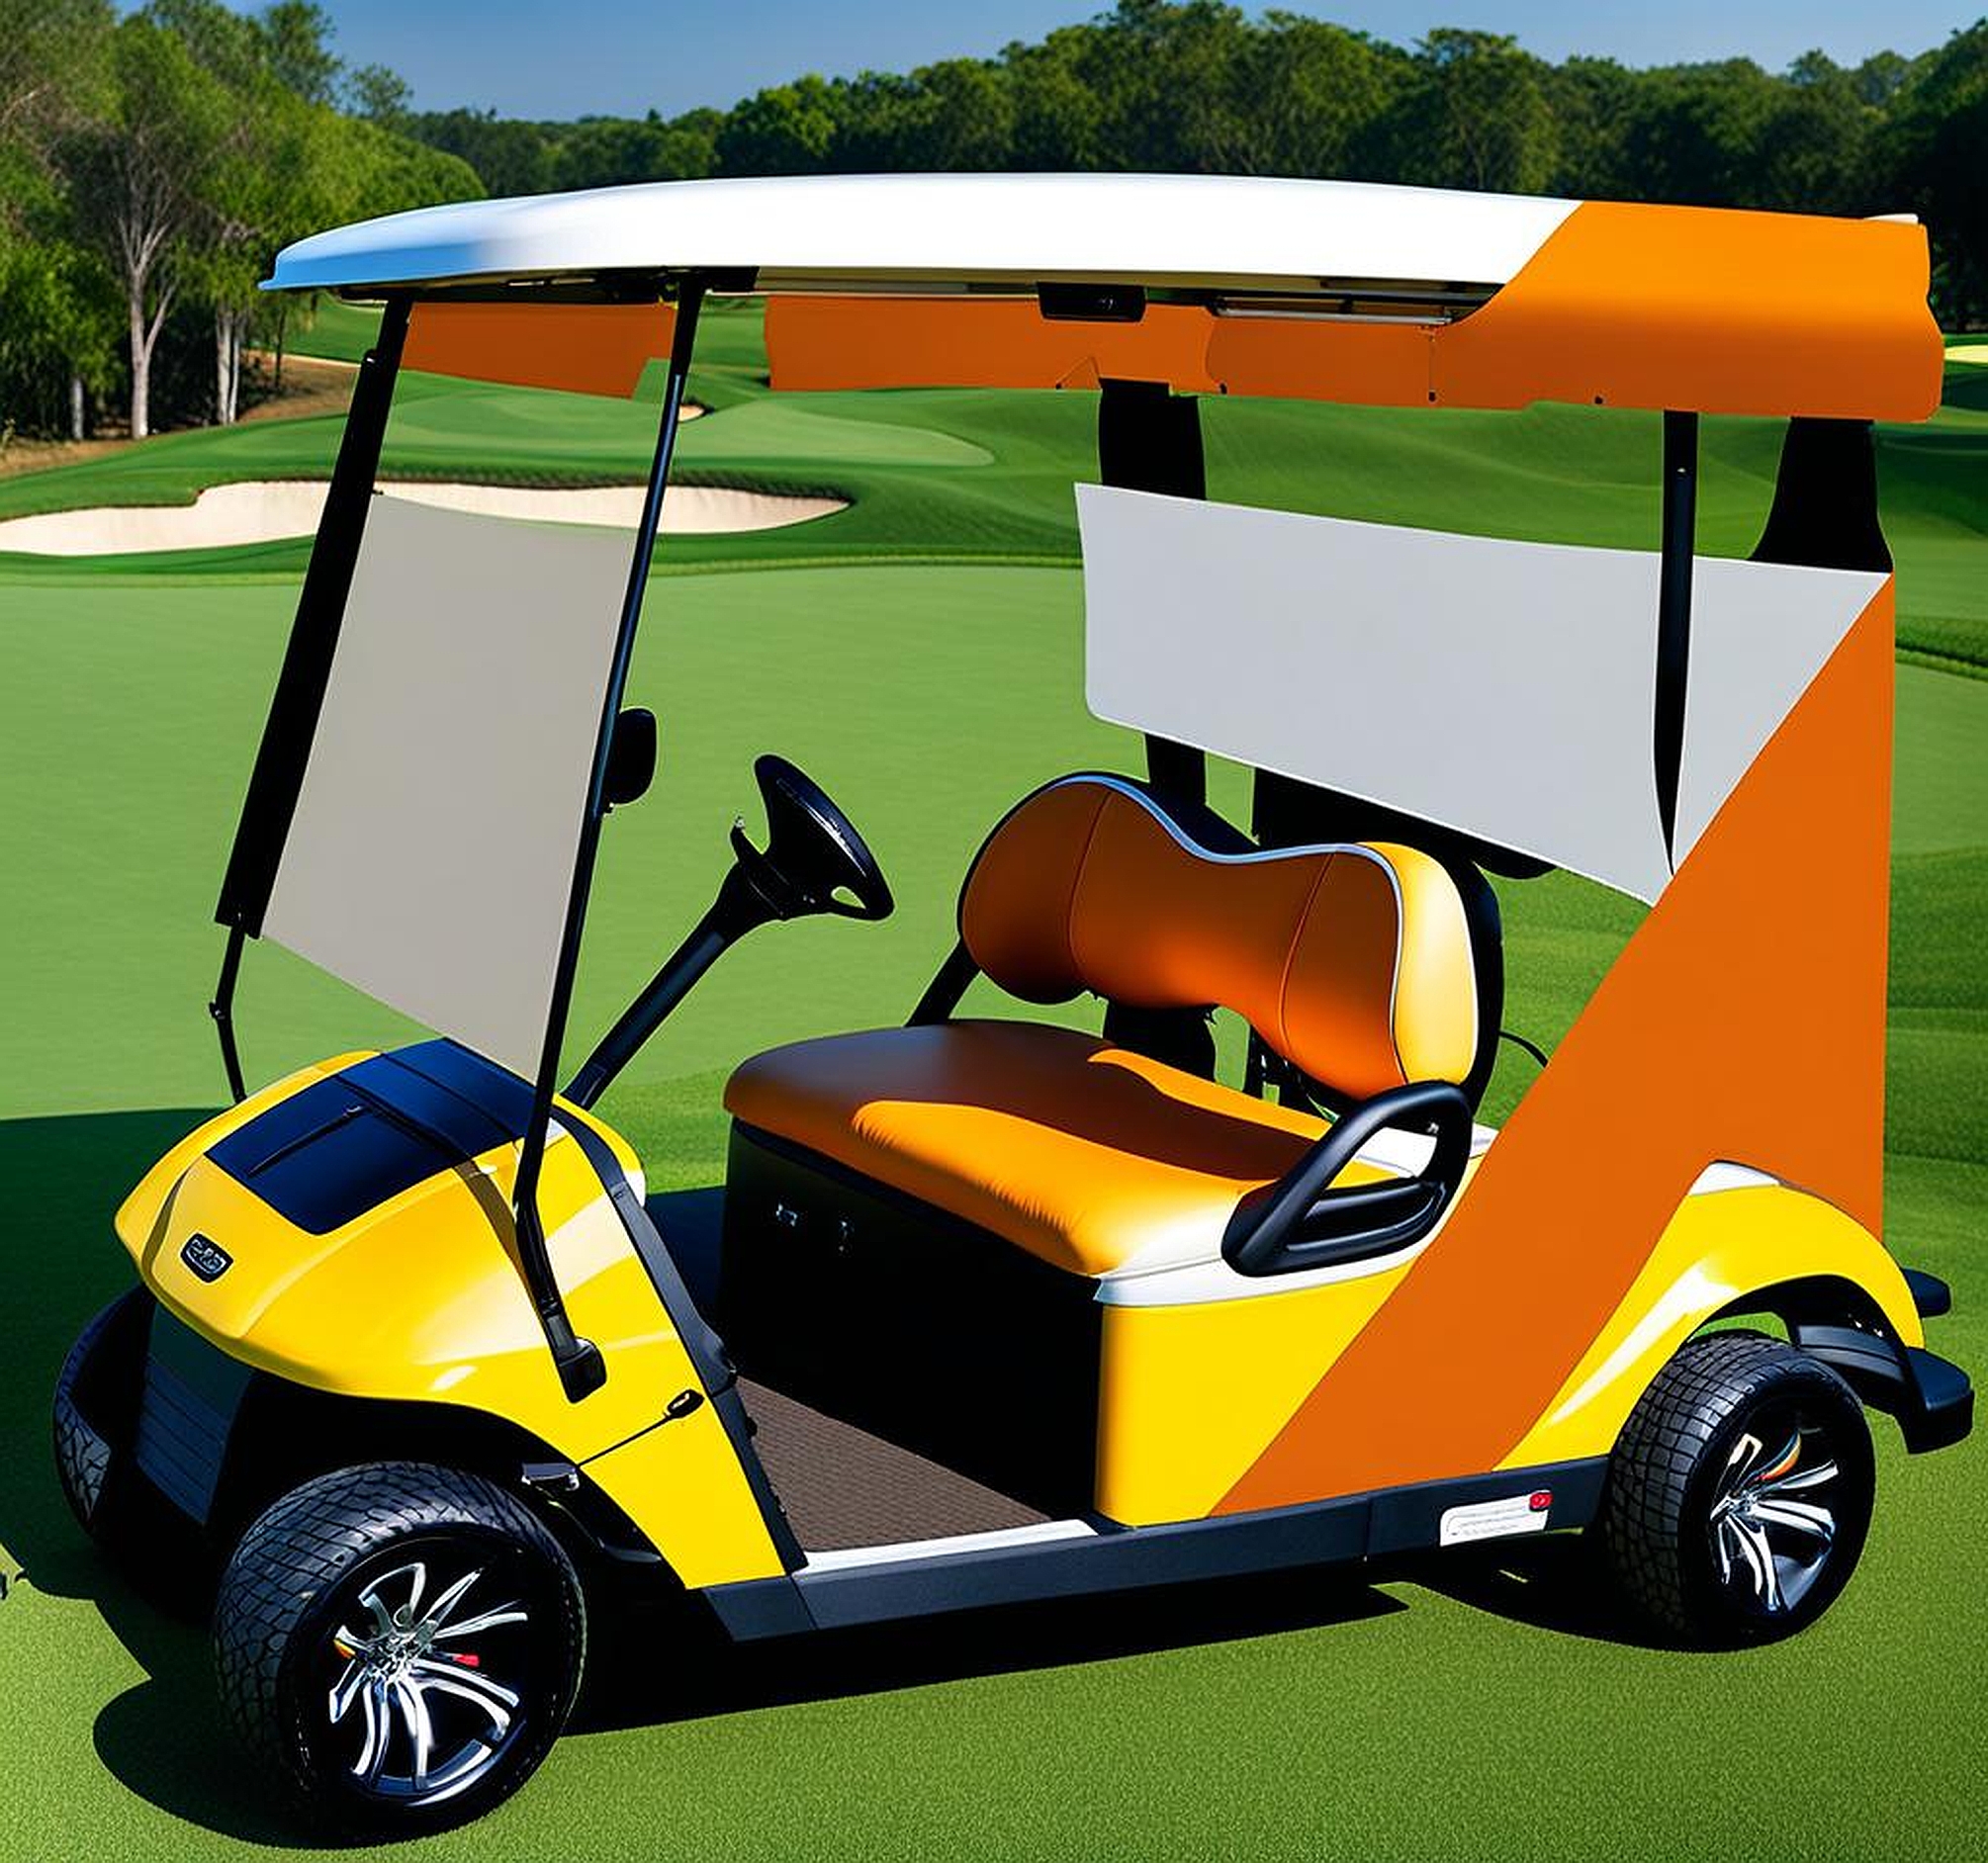 Customizing Golf Carts with Unique Side Curtain Designs